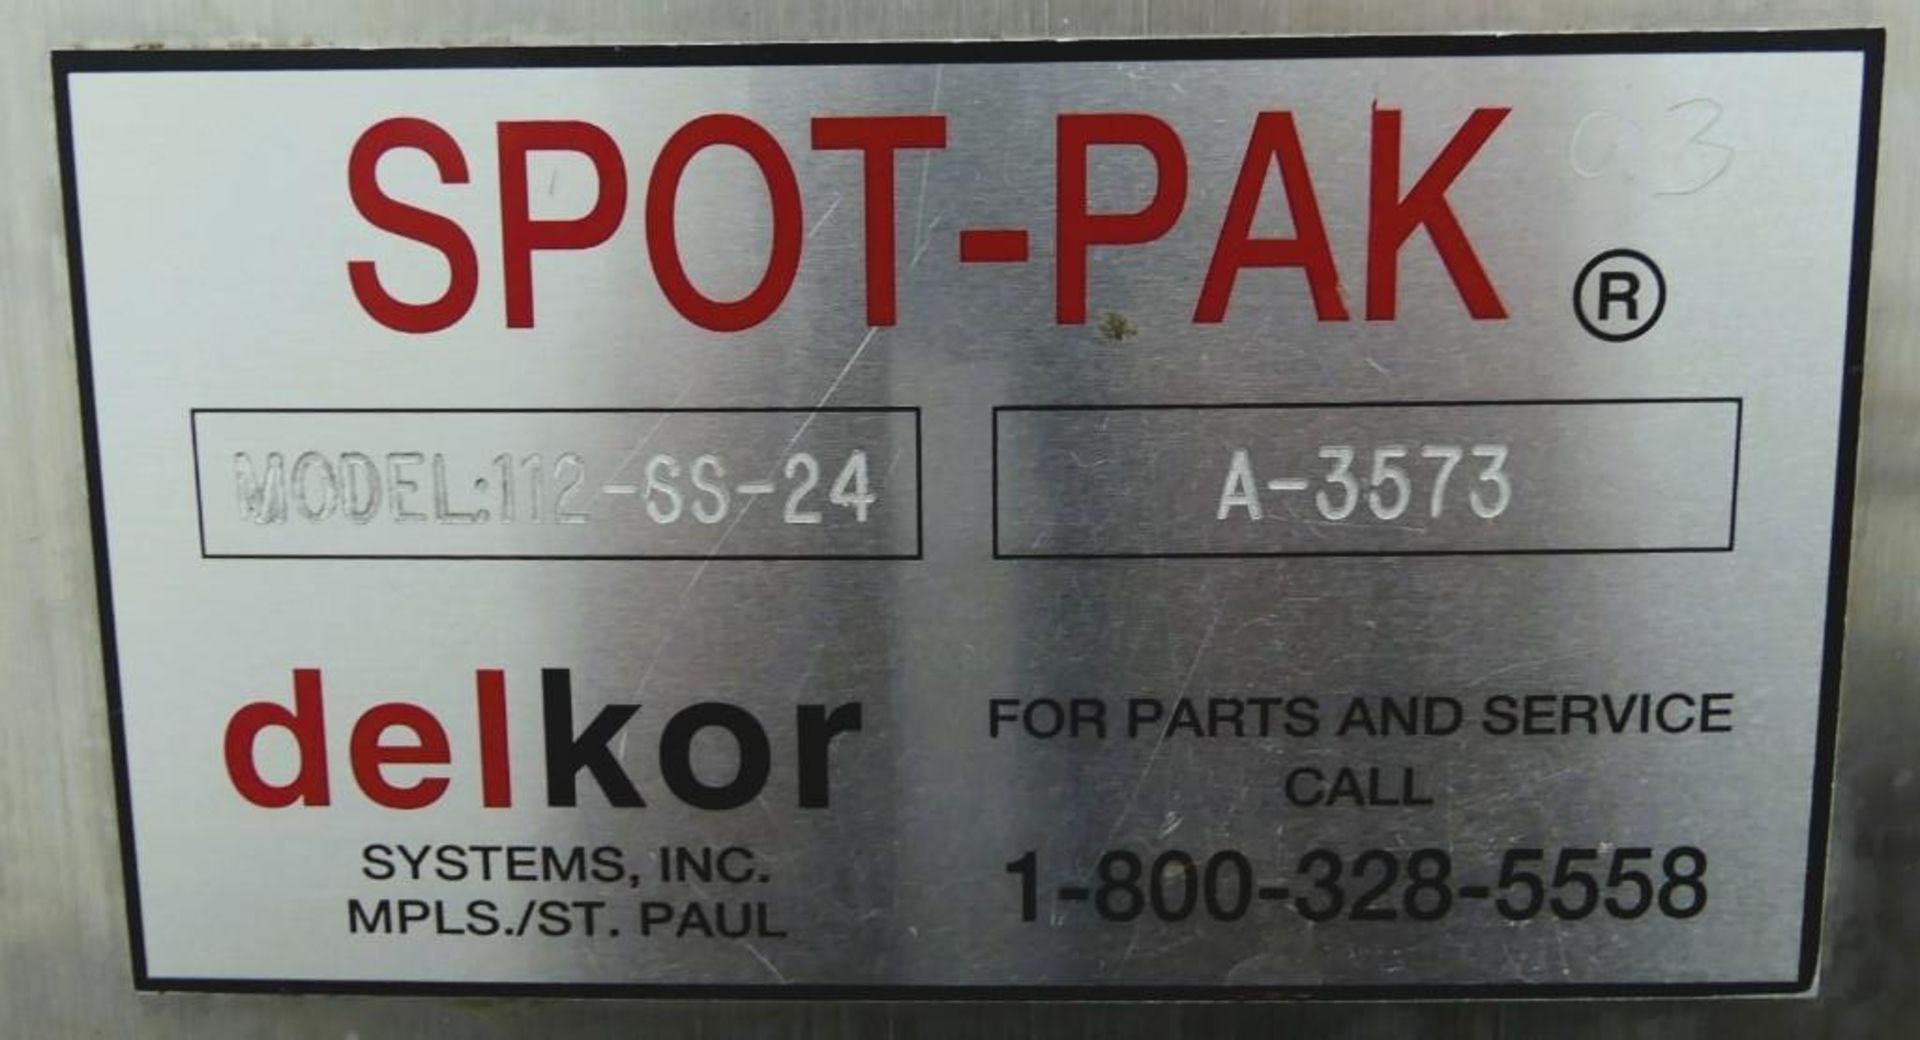 Arpac Delkor Spot-Pak 112-SS-24 Automatic Stainless Steel Shrink Bundler - Image 85 of 101